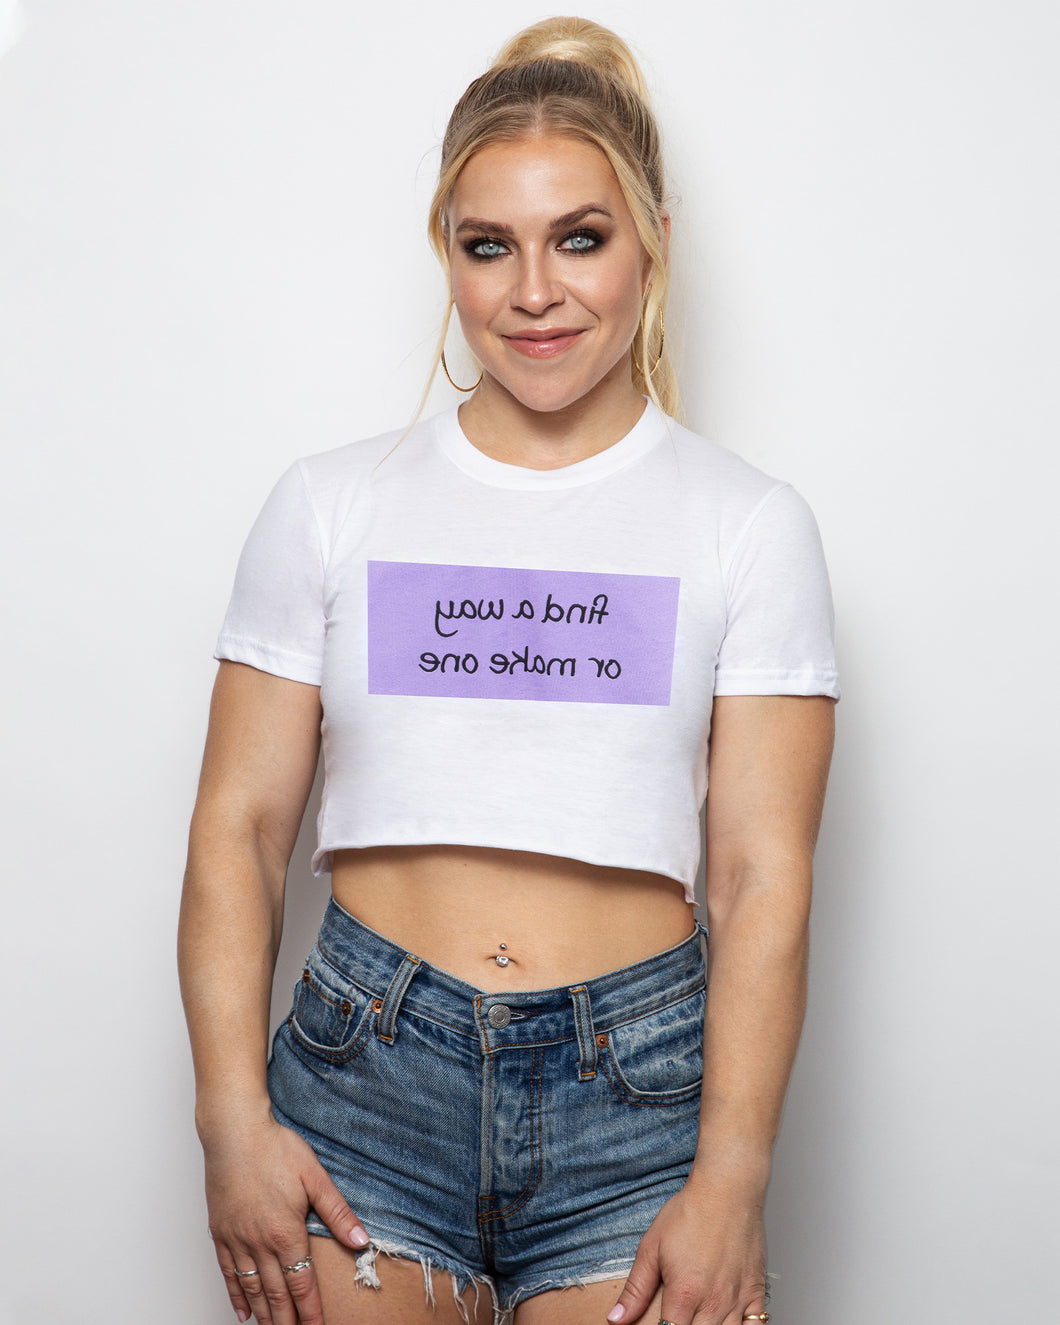 Find a Way - Cropped Cotton Tee Shirt